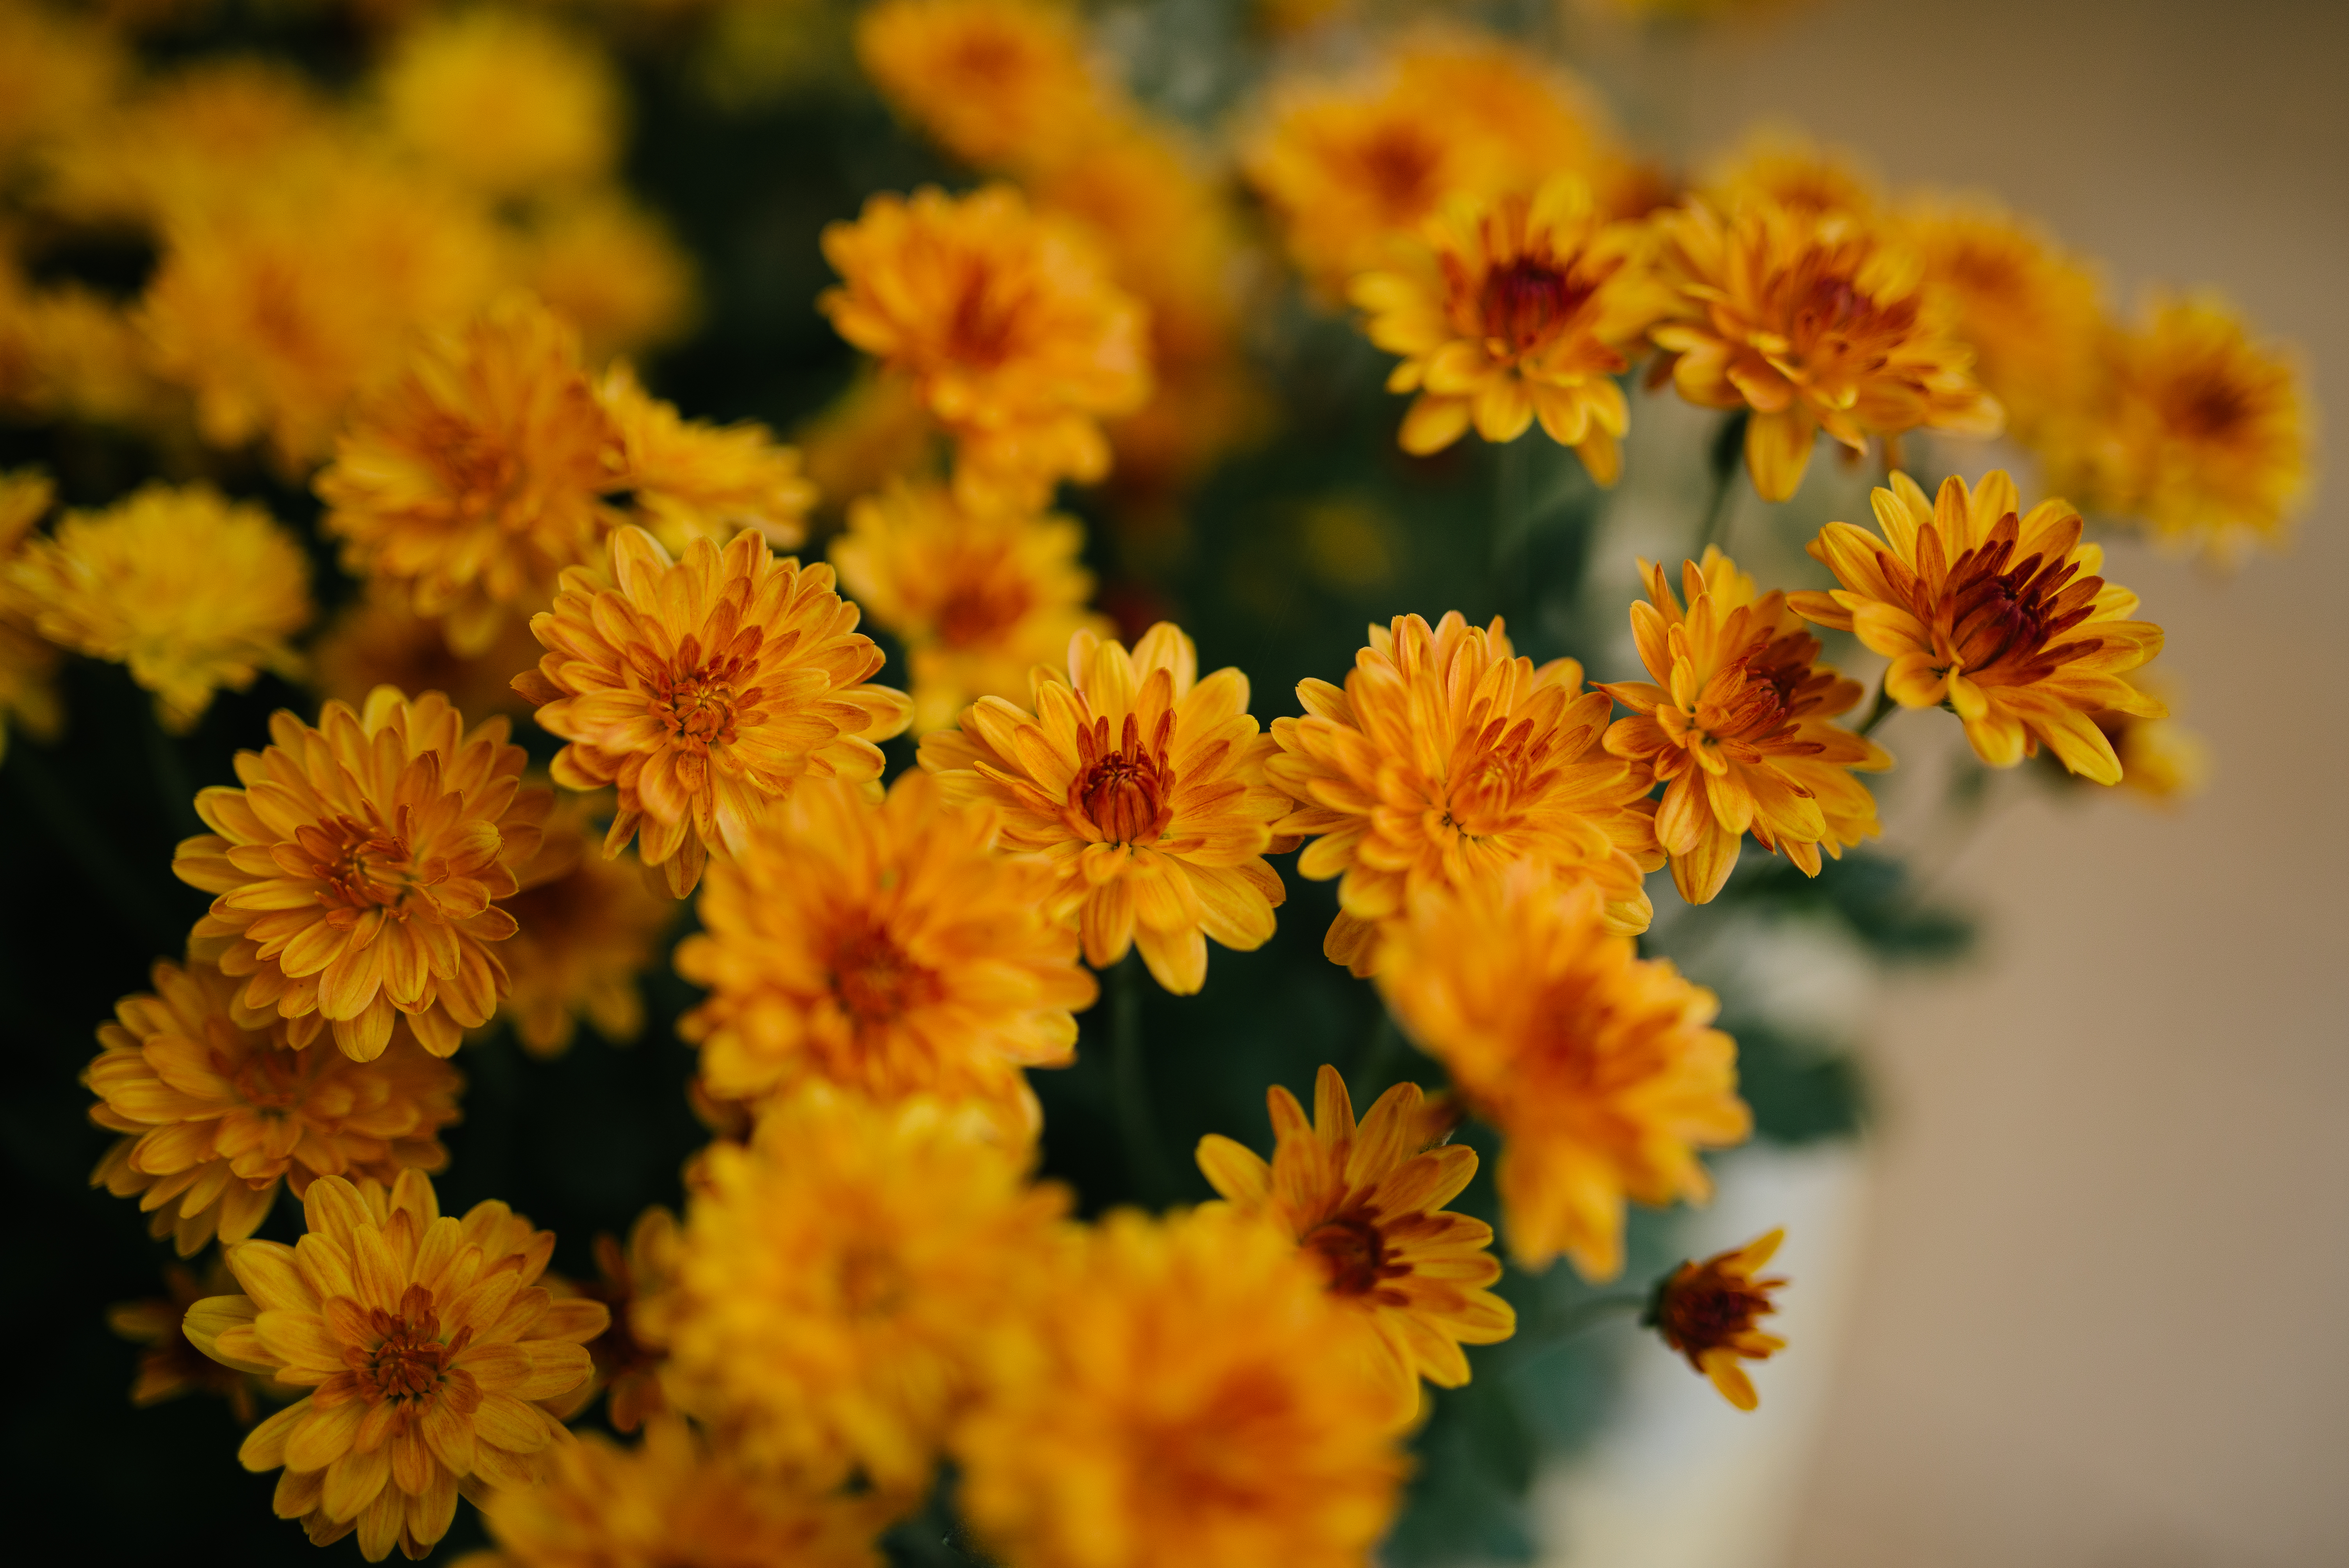 yellow, chrysanthemum, flowers, bouquet wallpaper for mobile